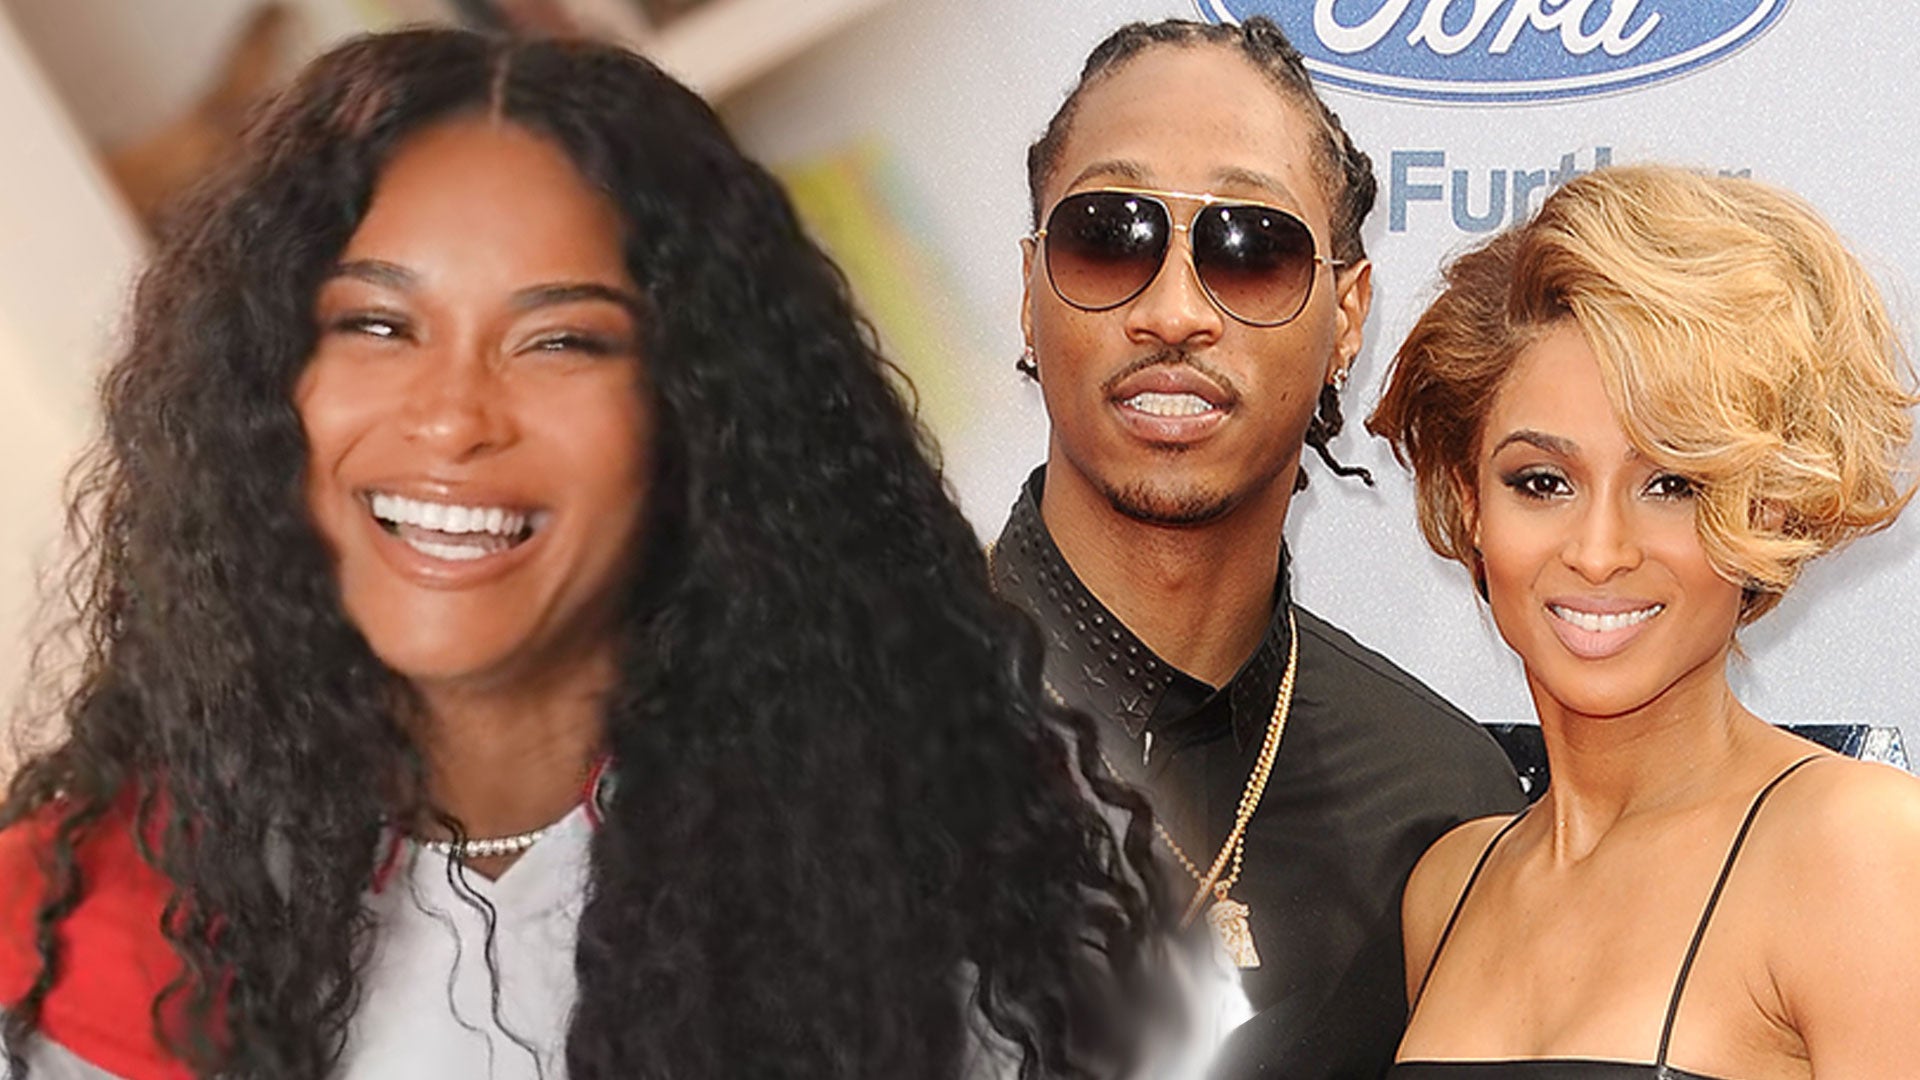 Ciara laughs at idea of co-parenting with Future